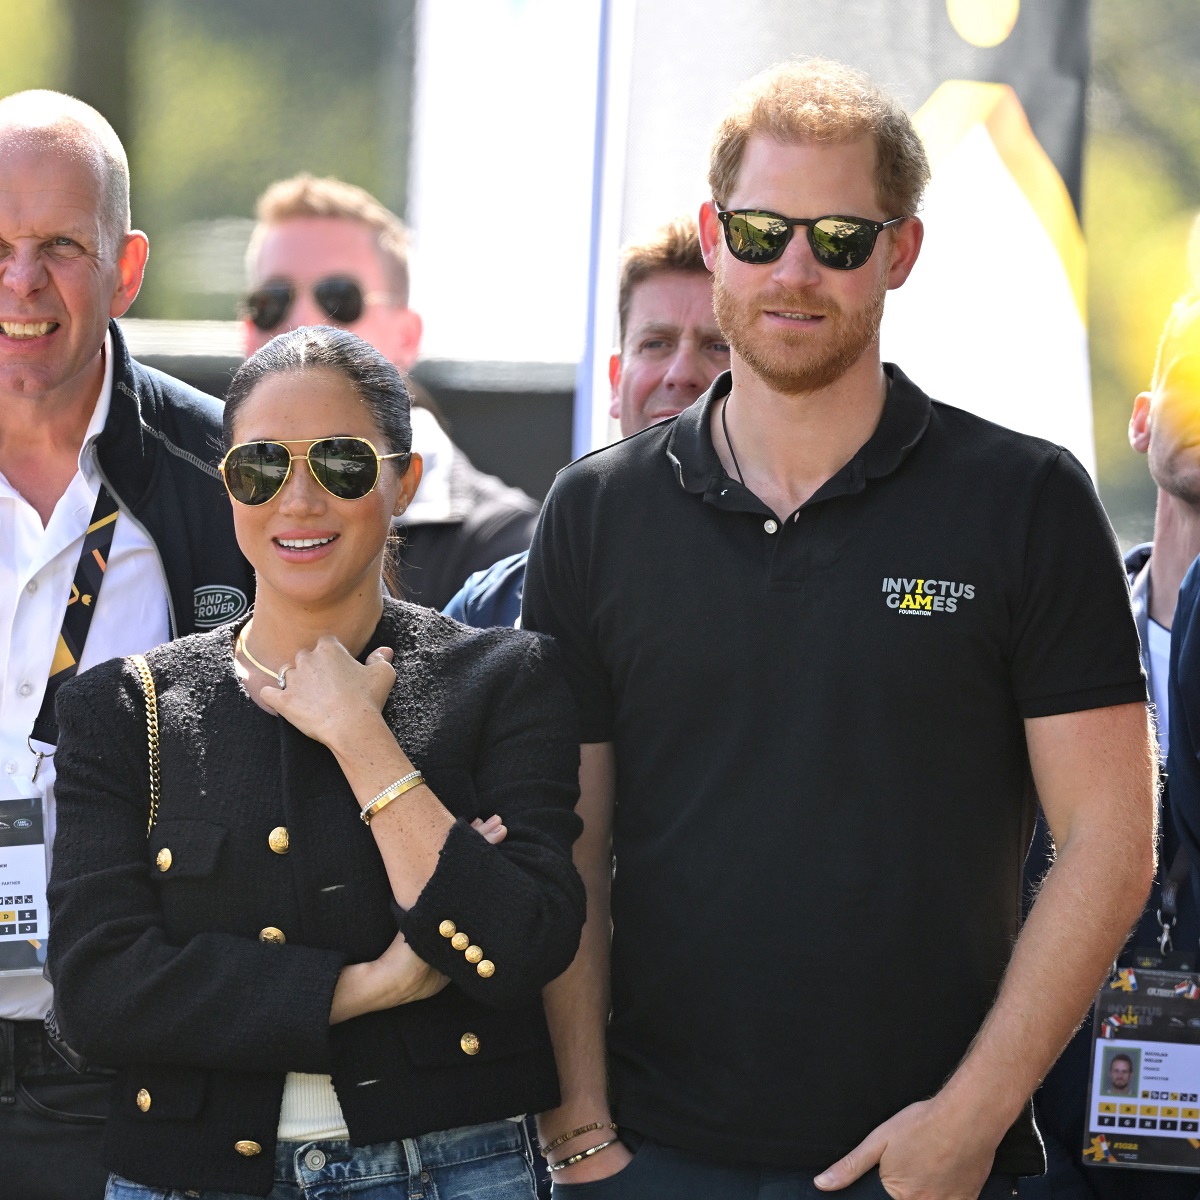 Prince Harry and Meghan Markle, who are reportedly starting to produce Netflix content, side by side during an Invictus Games event